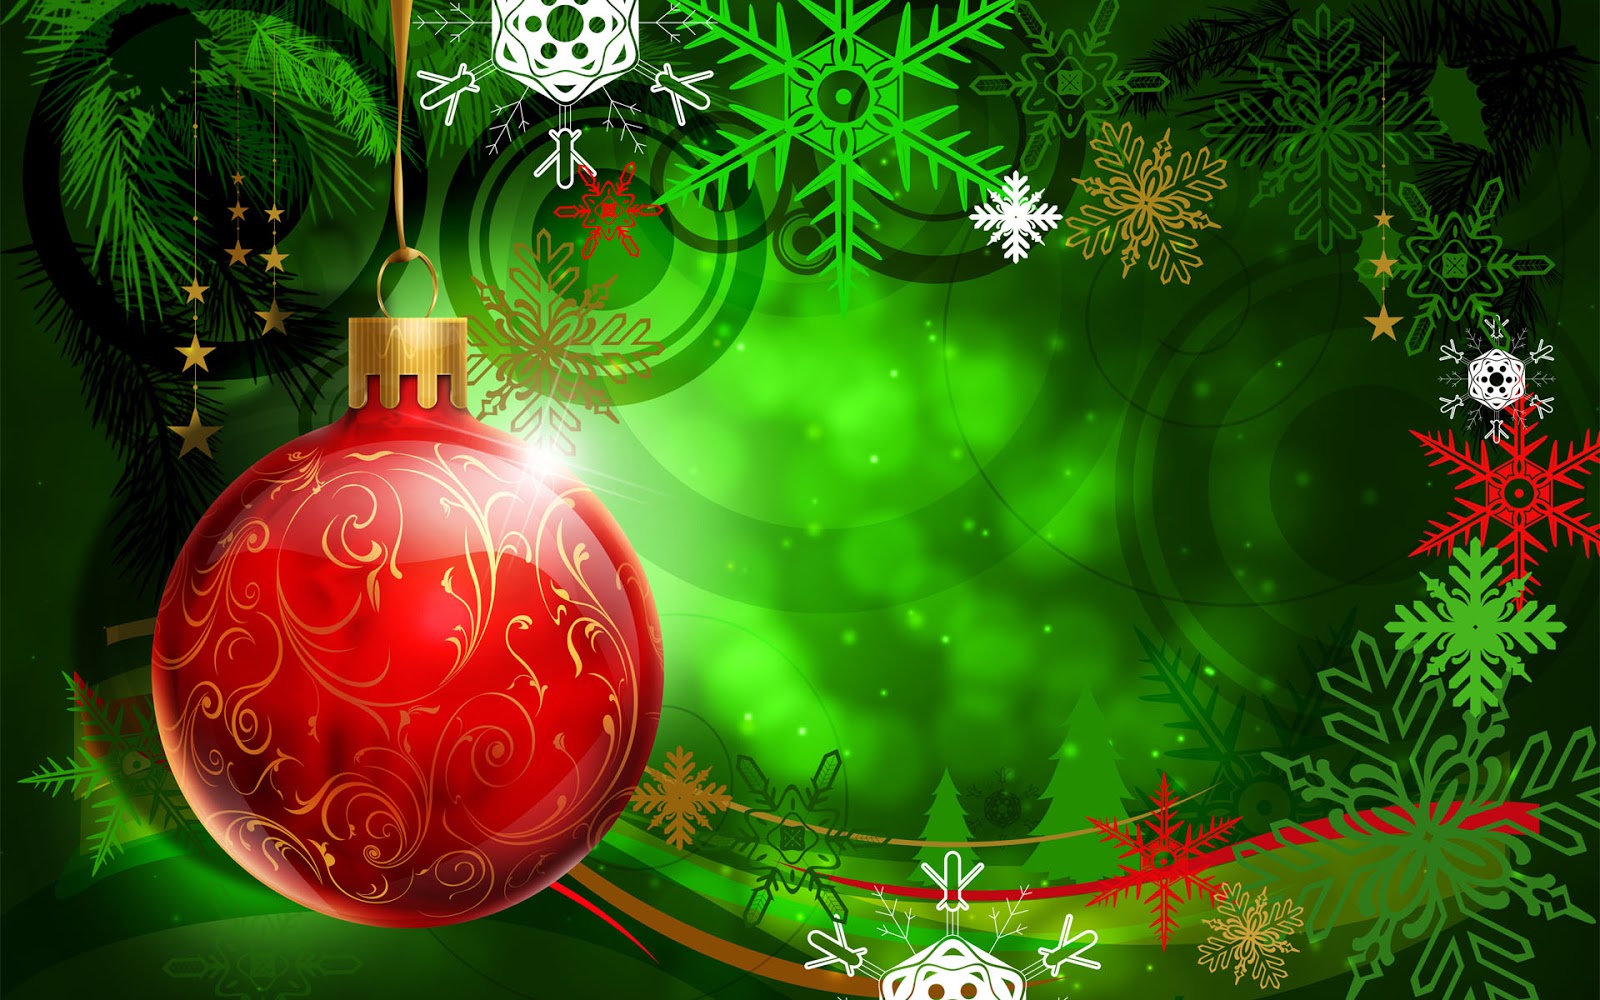 HD Wallpaper Download: Colorful Happy Merry Christmas 